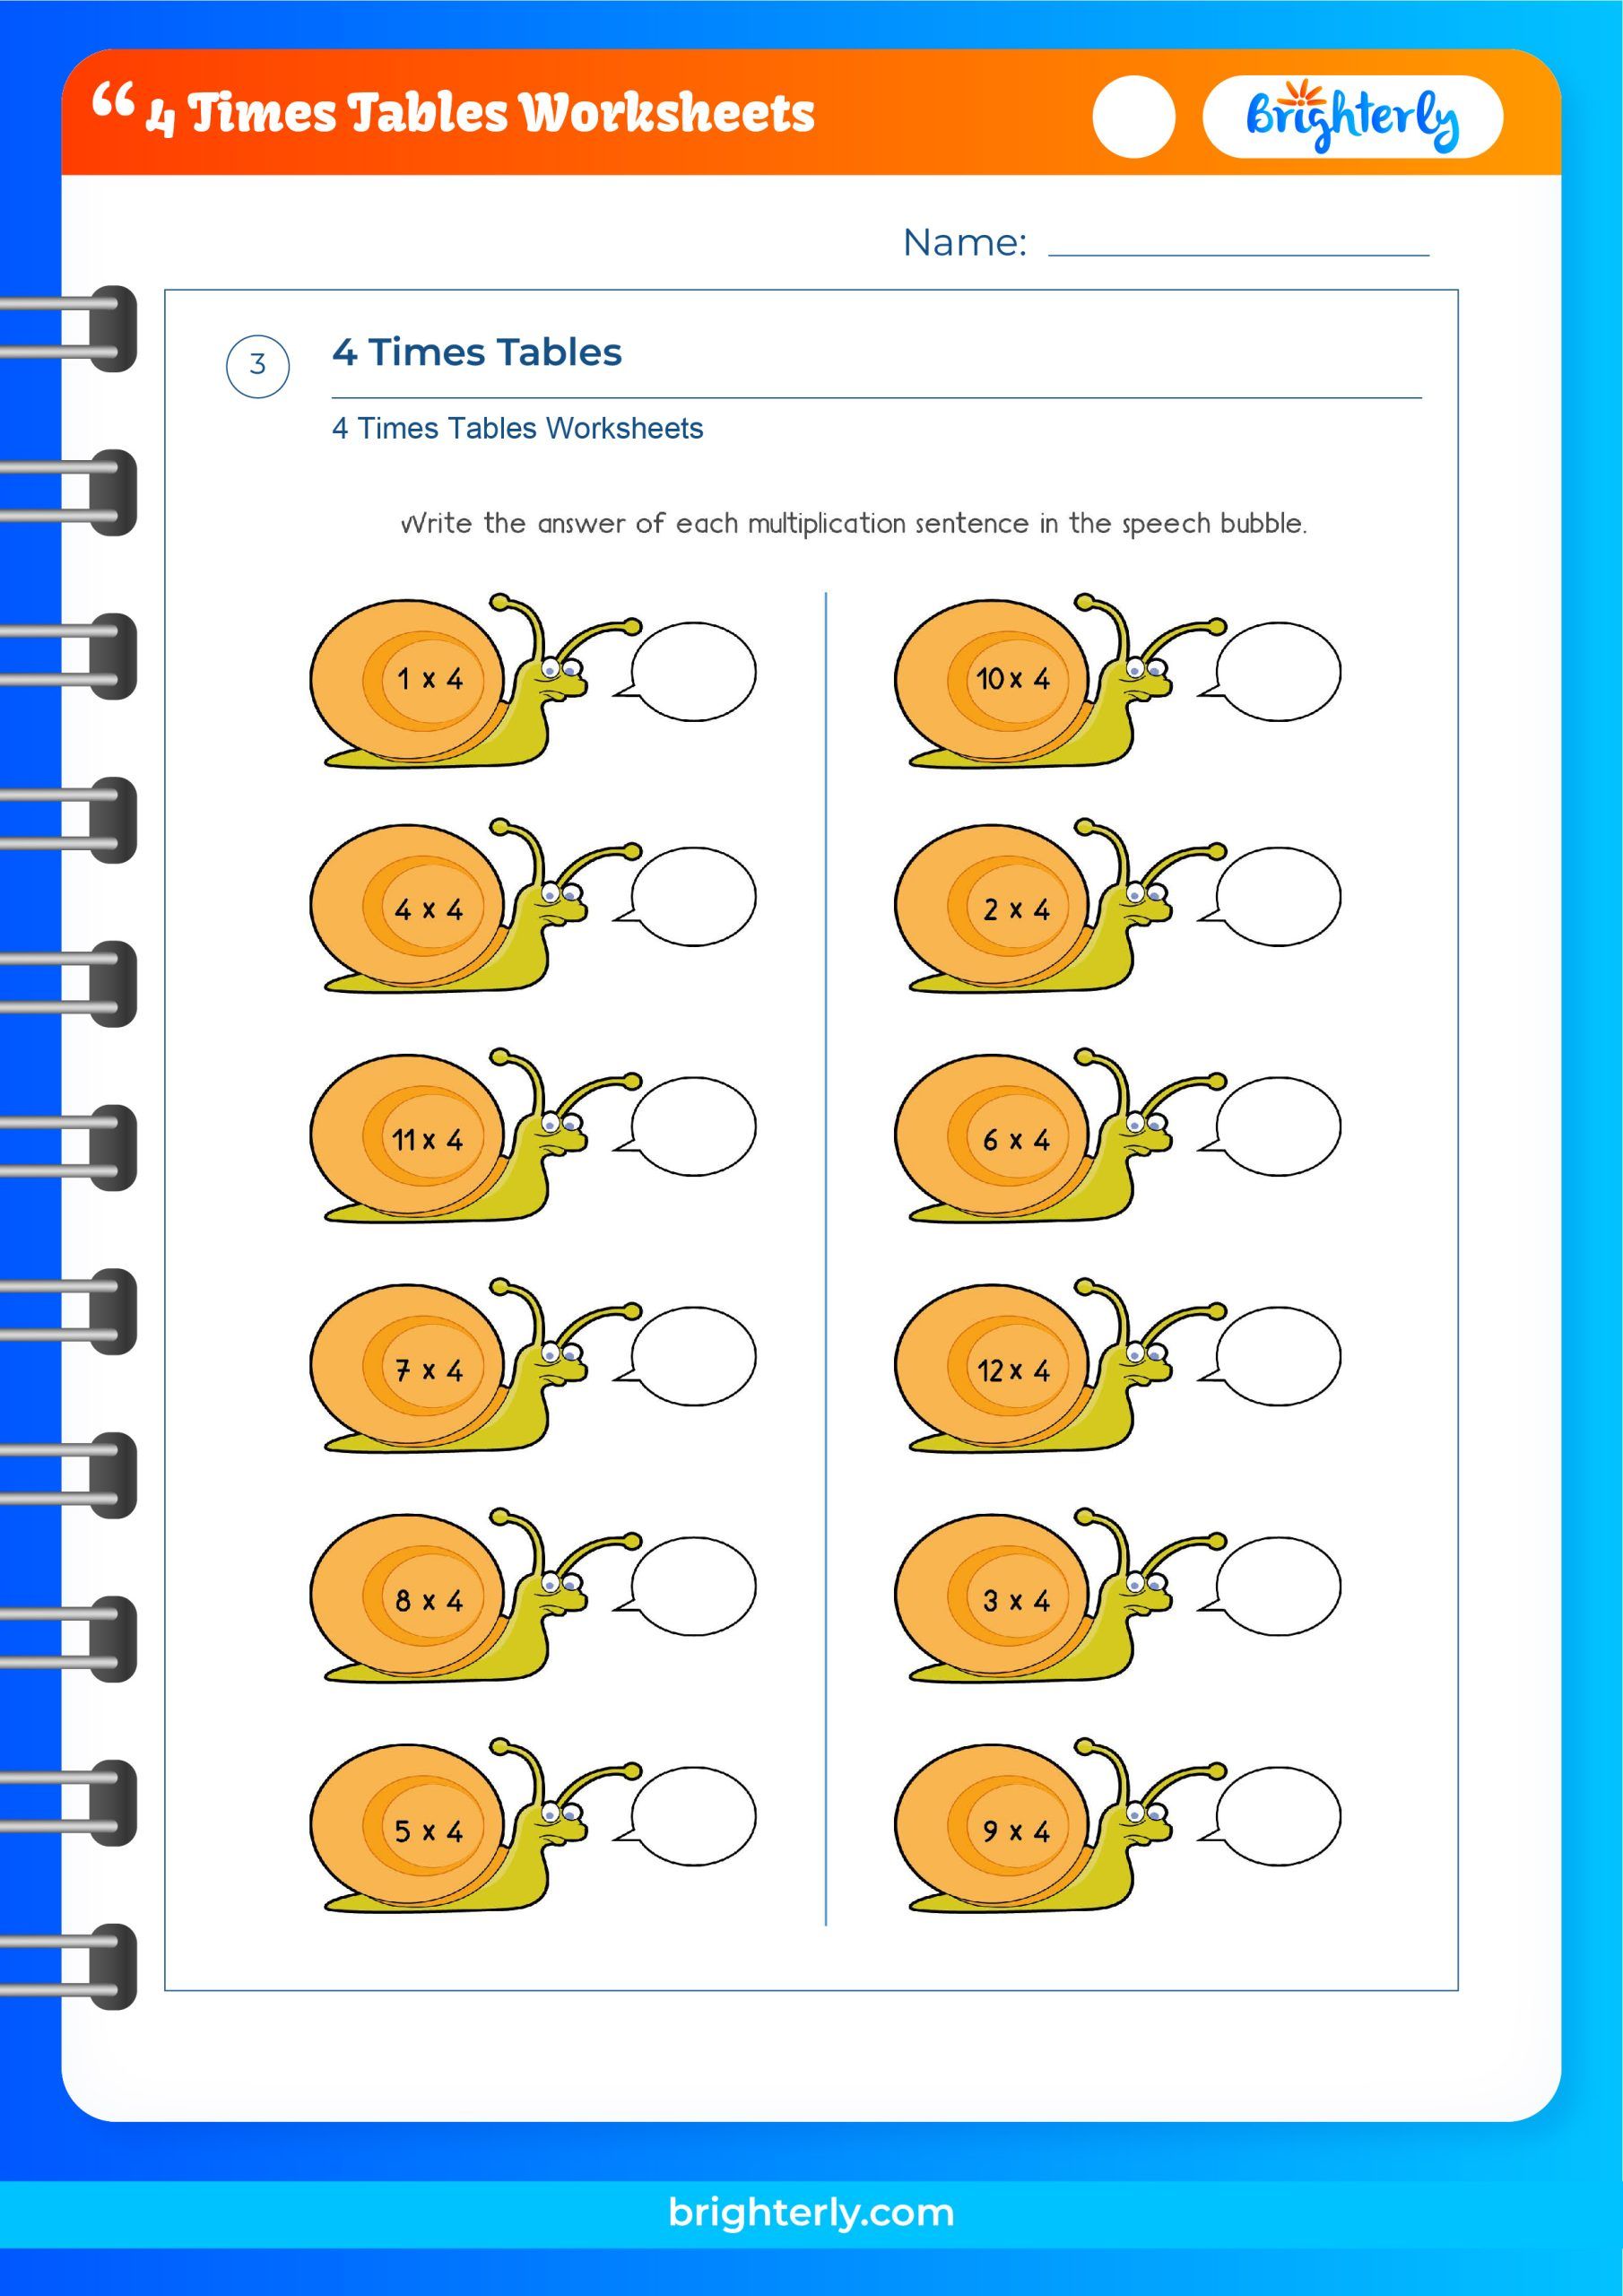 4 Times Tables Worksheets